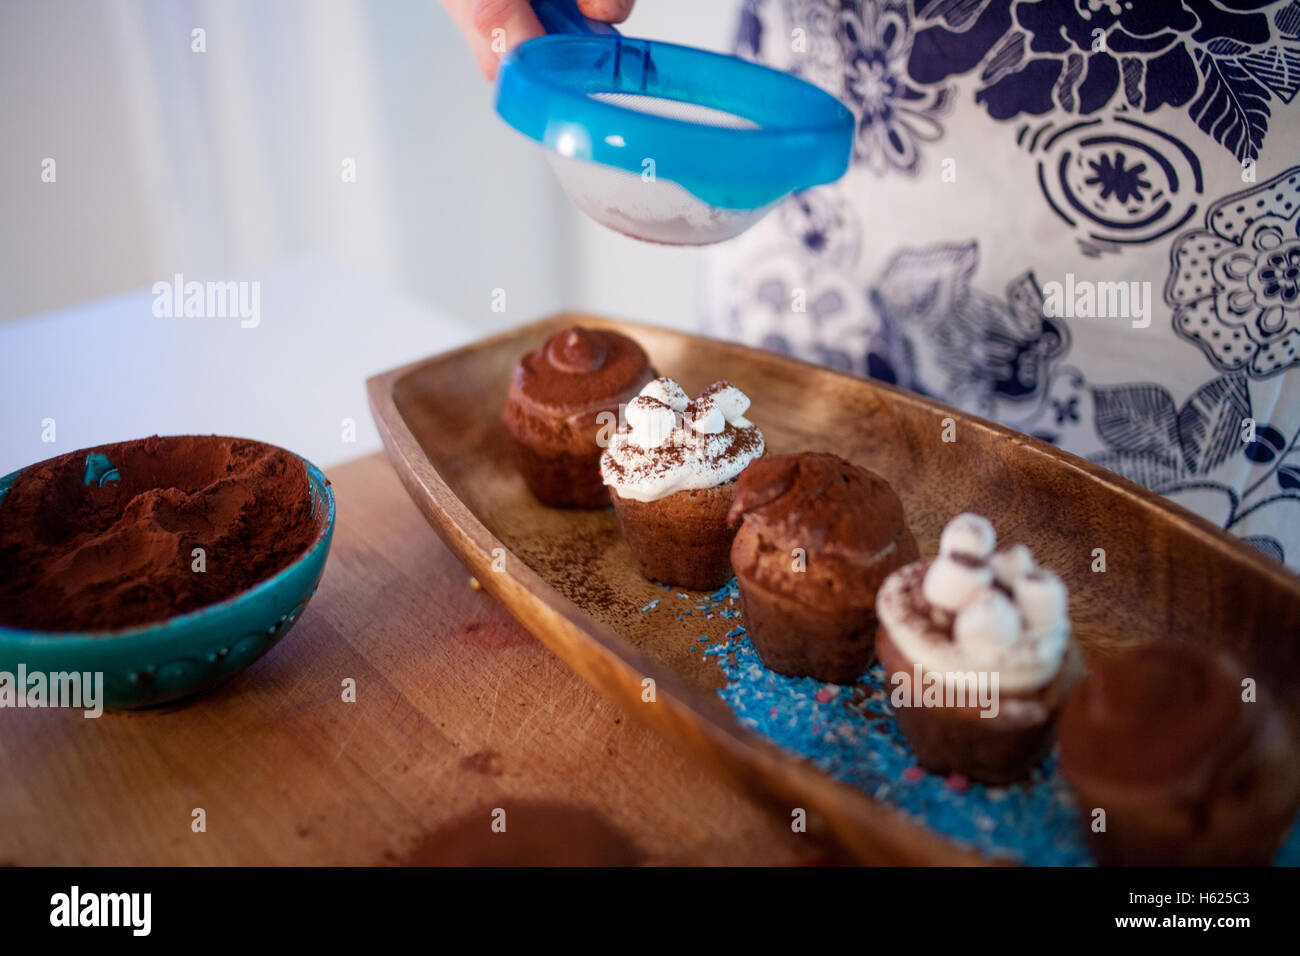 cooking cupcakes, muffins and a plate of ingredients for decoration on the table Stock Photo